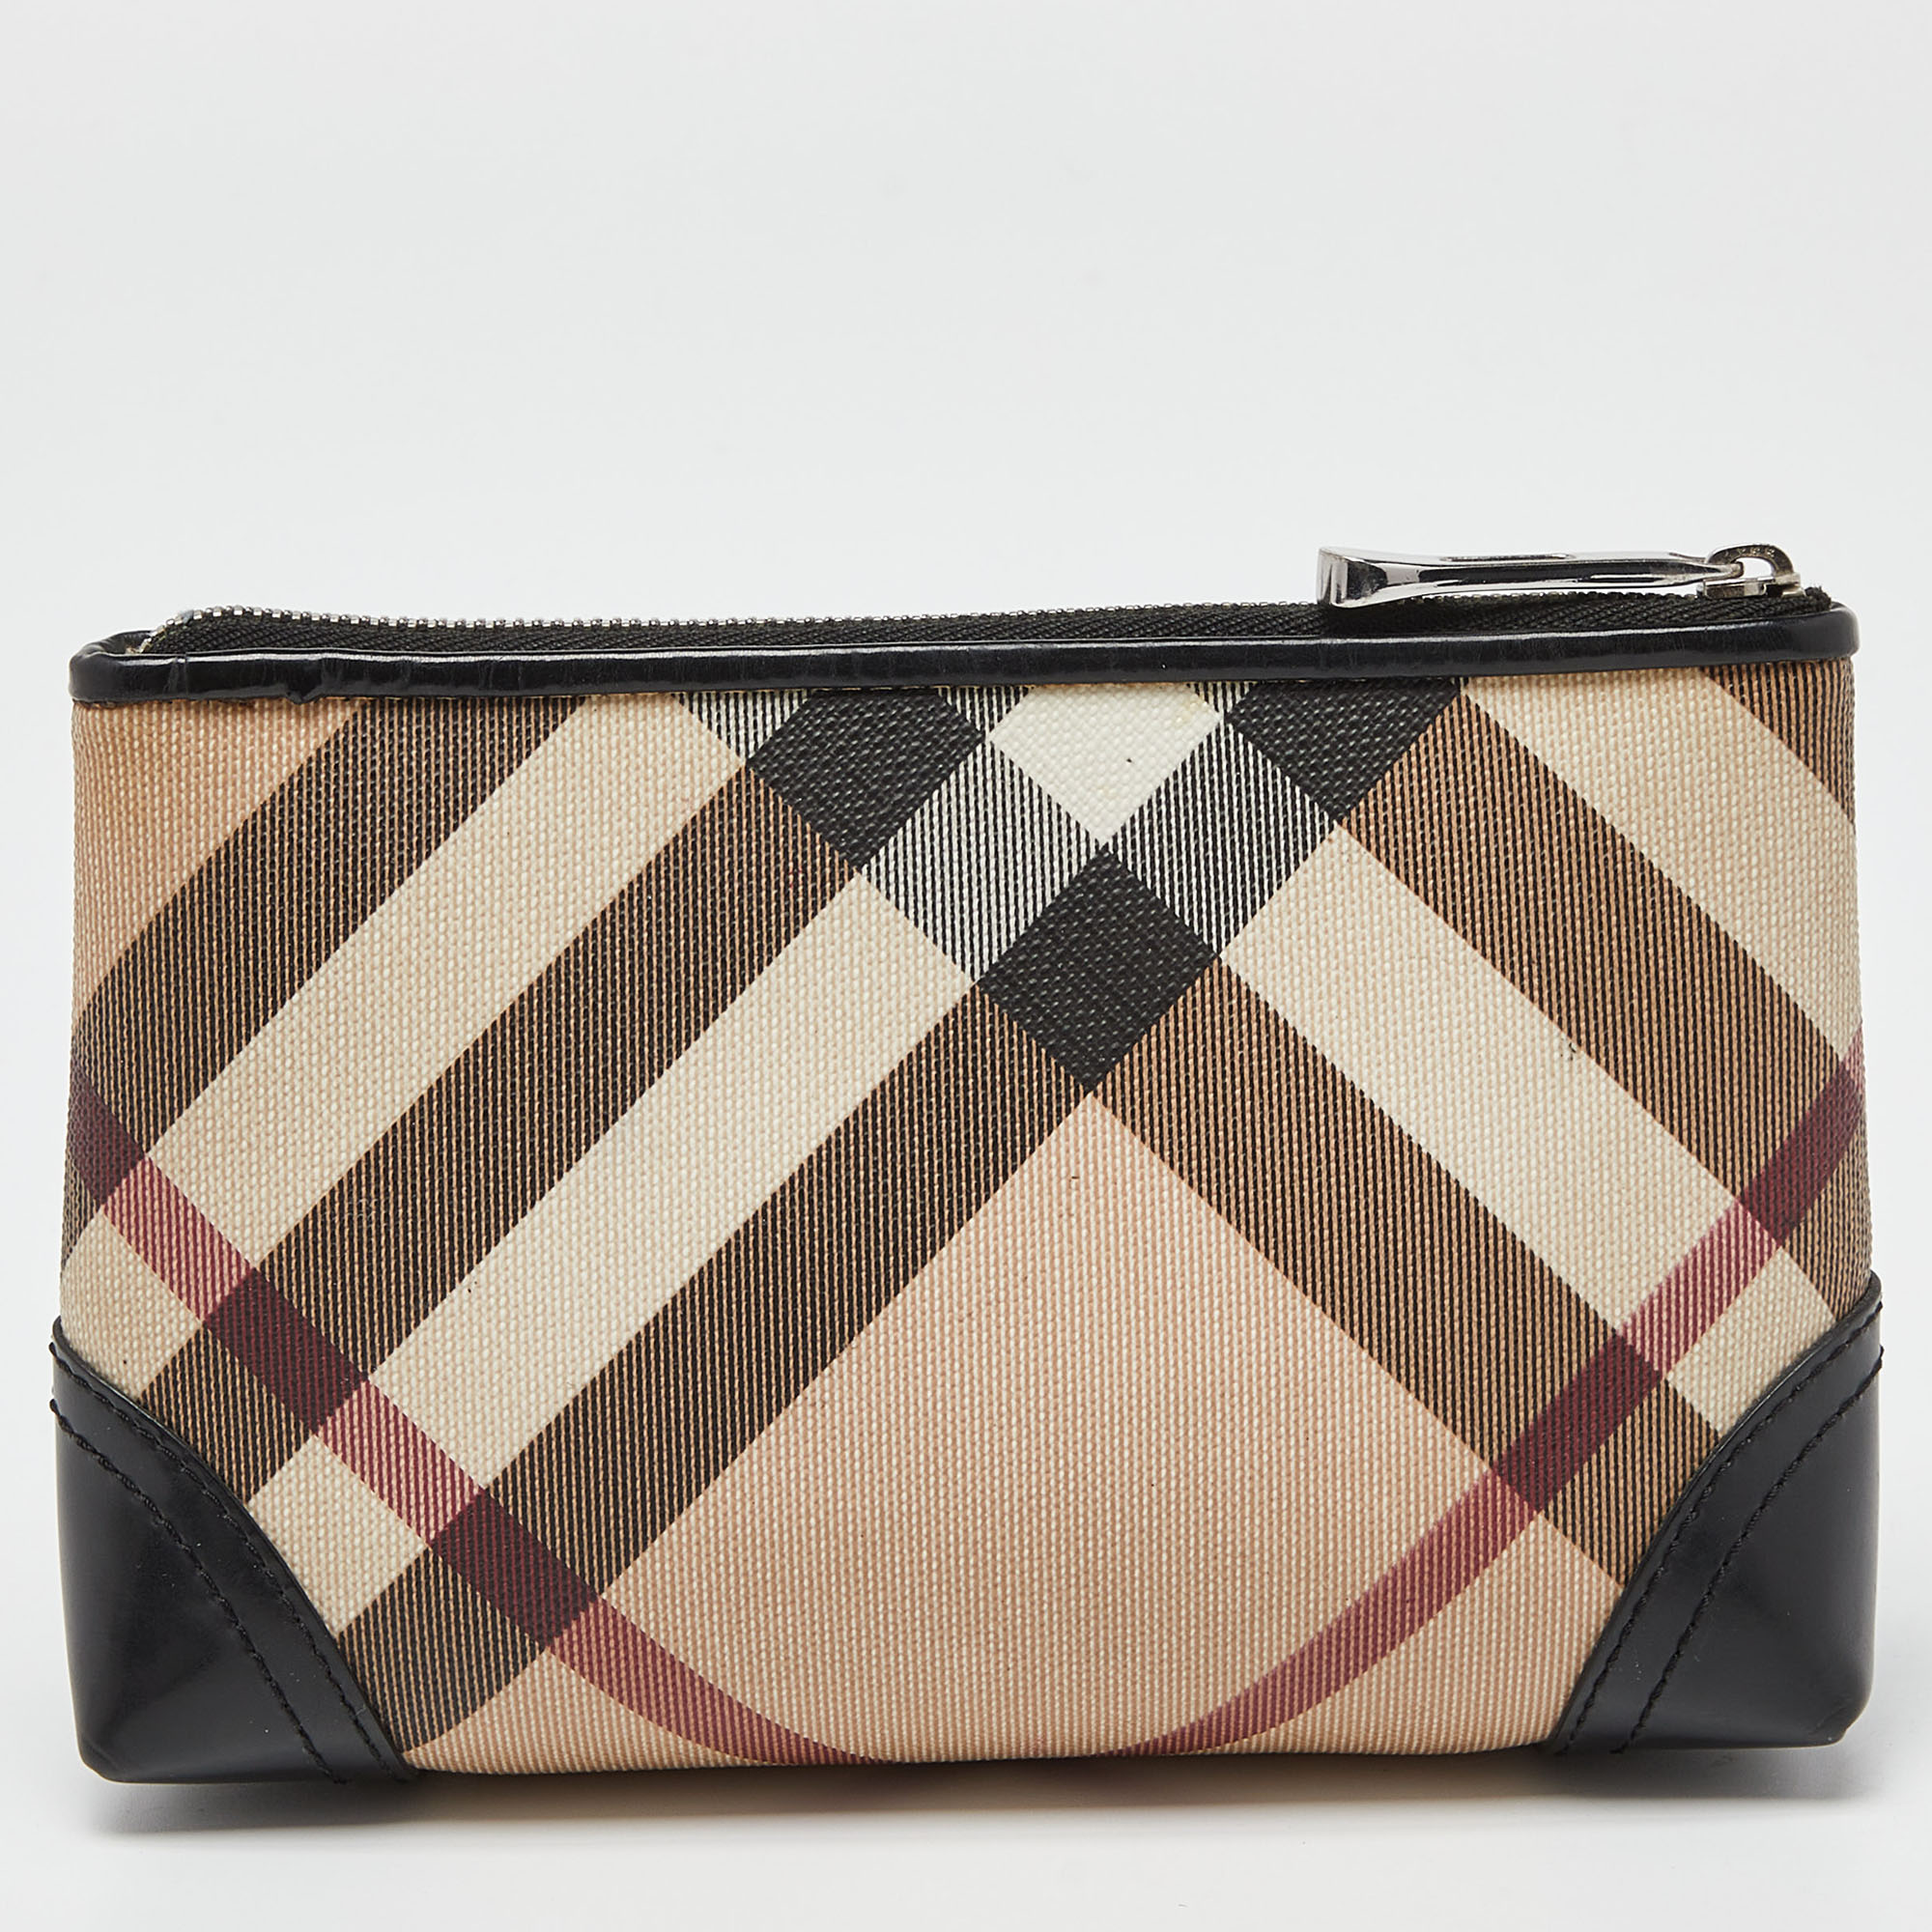 Burberry Beige/Black Nova Check Coated Canvas And Patent Leather Pouch